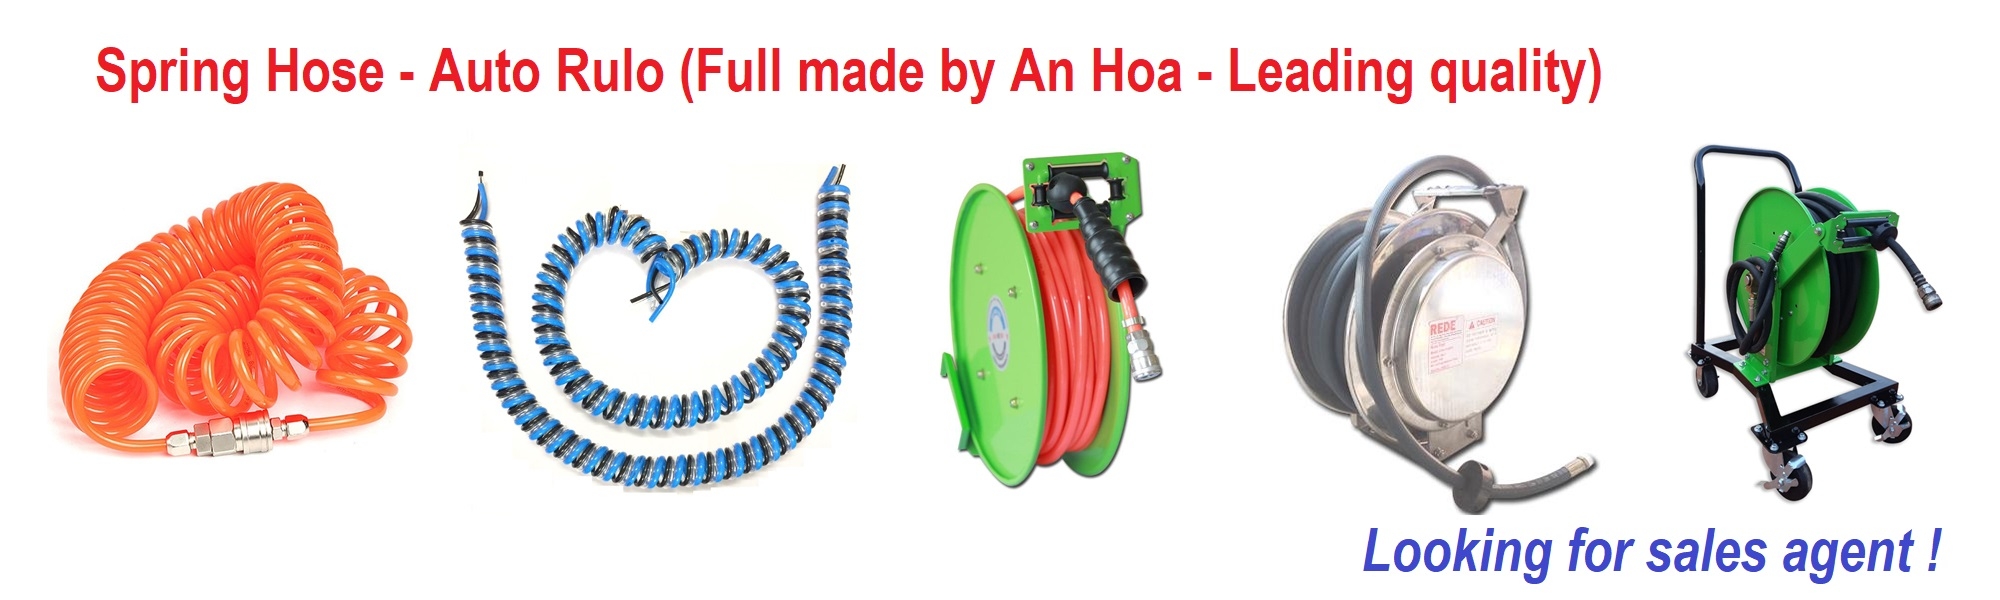 Looking for sales agent - Spring Hose - Auto Rulo